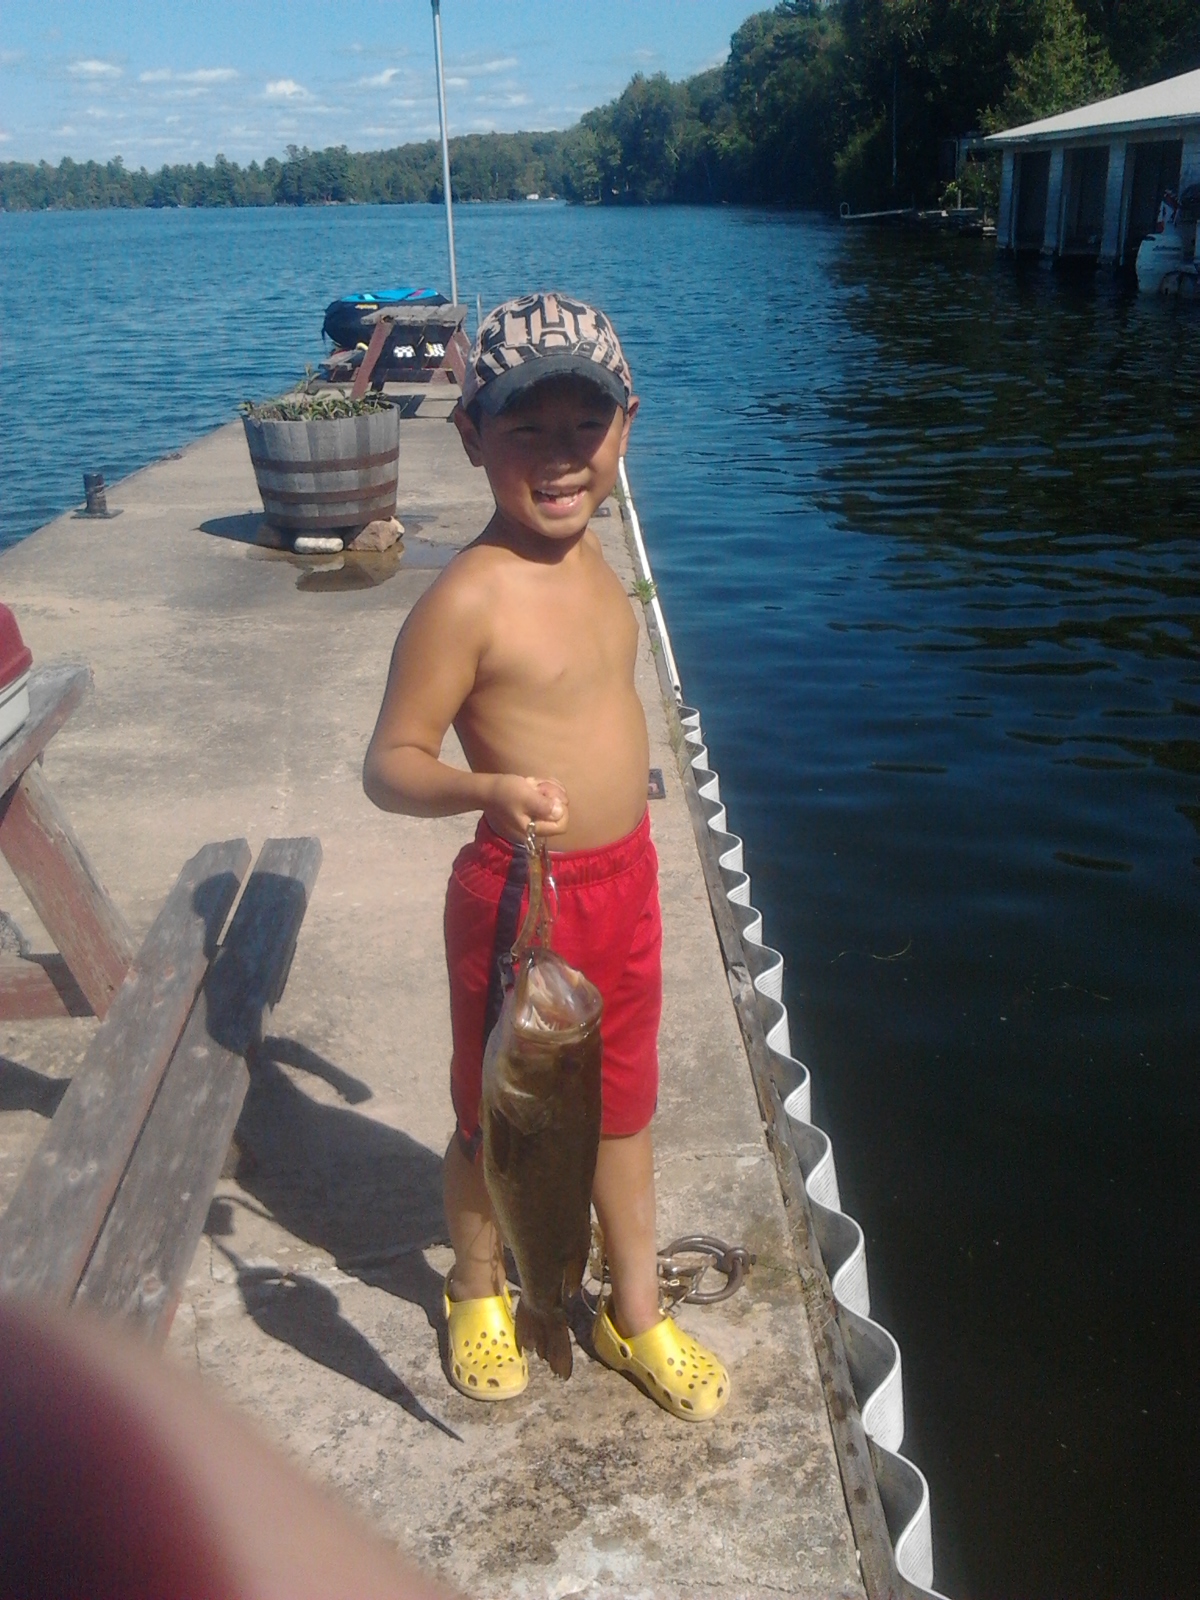 Nice fish, bigger than uncle Jeremy's